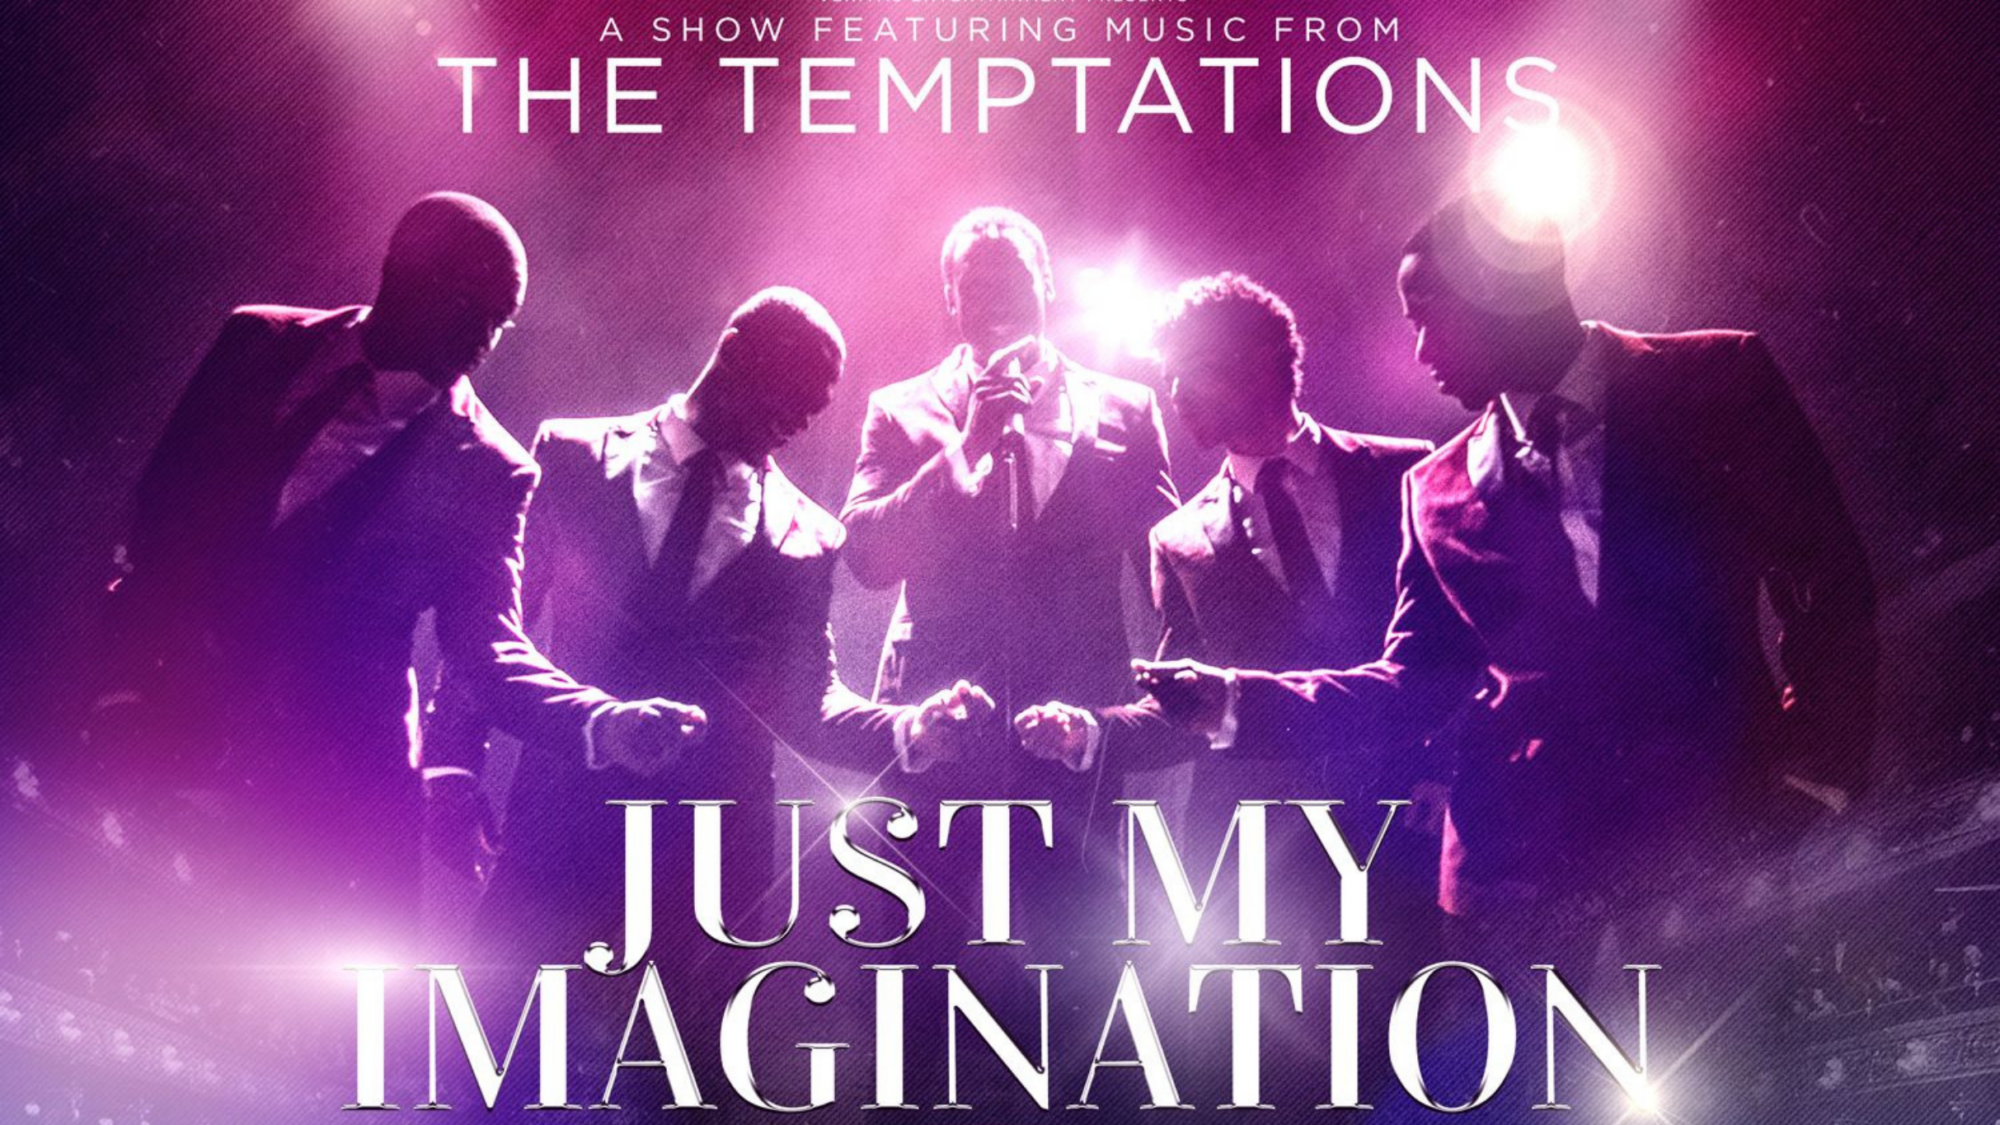 Image name Just My Imagination The Music of the Temptations at Sheffield City Hall Oval Hall Sheffield the 8 image from the post Just My Imagination - The Music of the Temptations at Sheffield City Hall Oval Hall, Sheffield in Yorkshire.com.